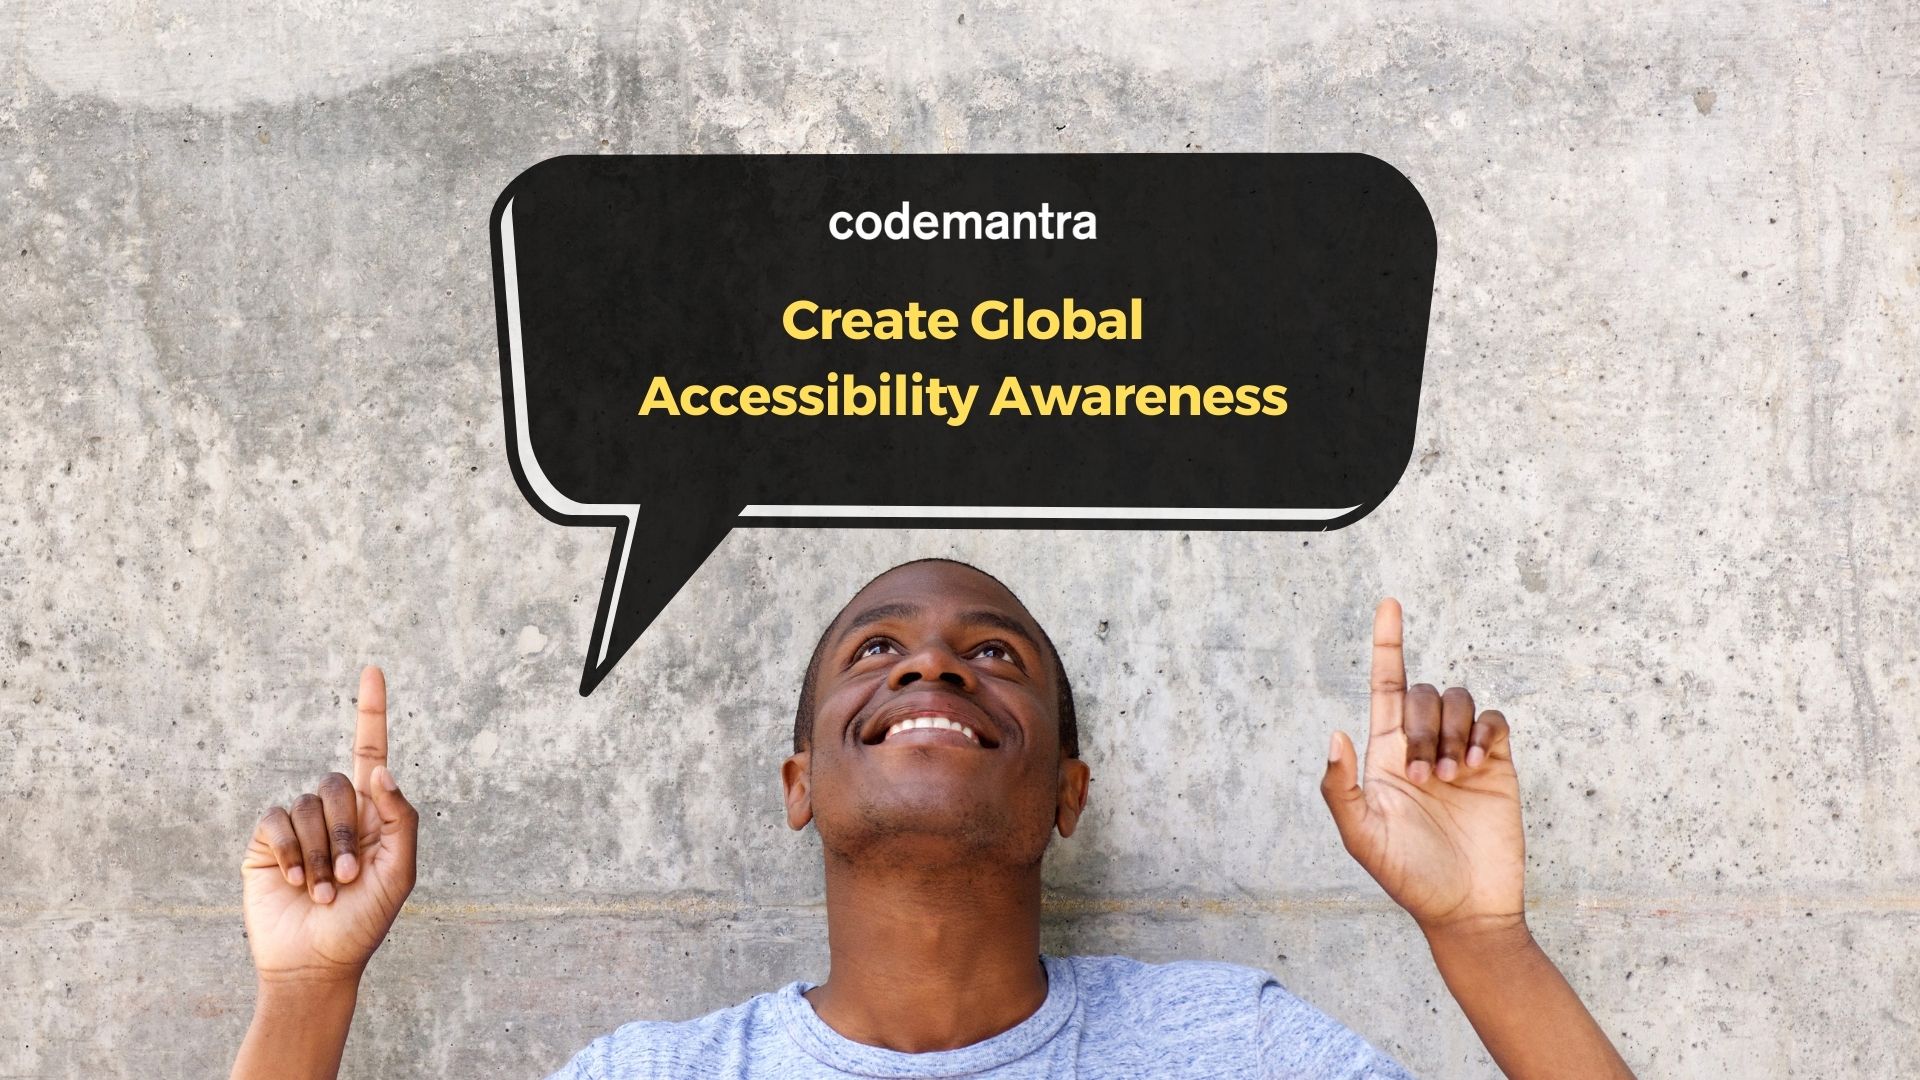 Celebrate Global Accessibility Awareness Day